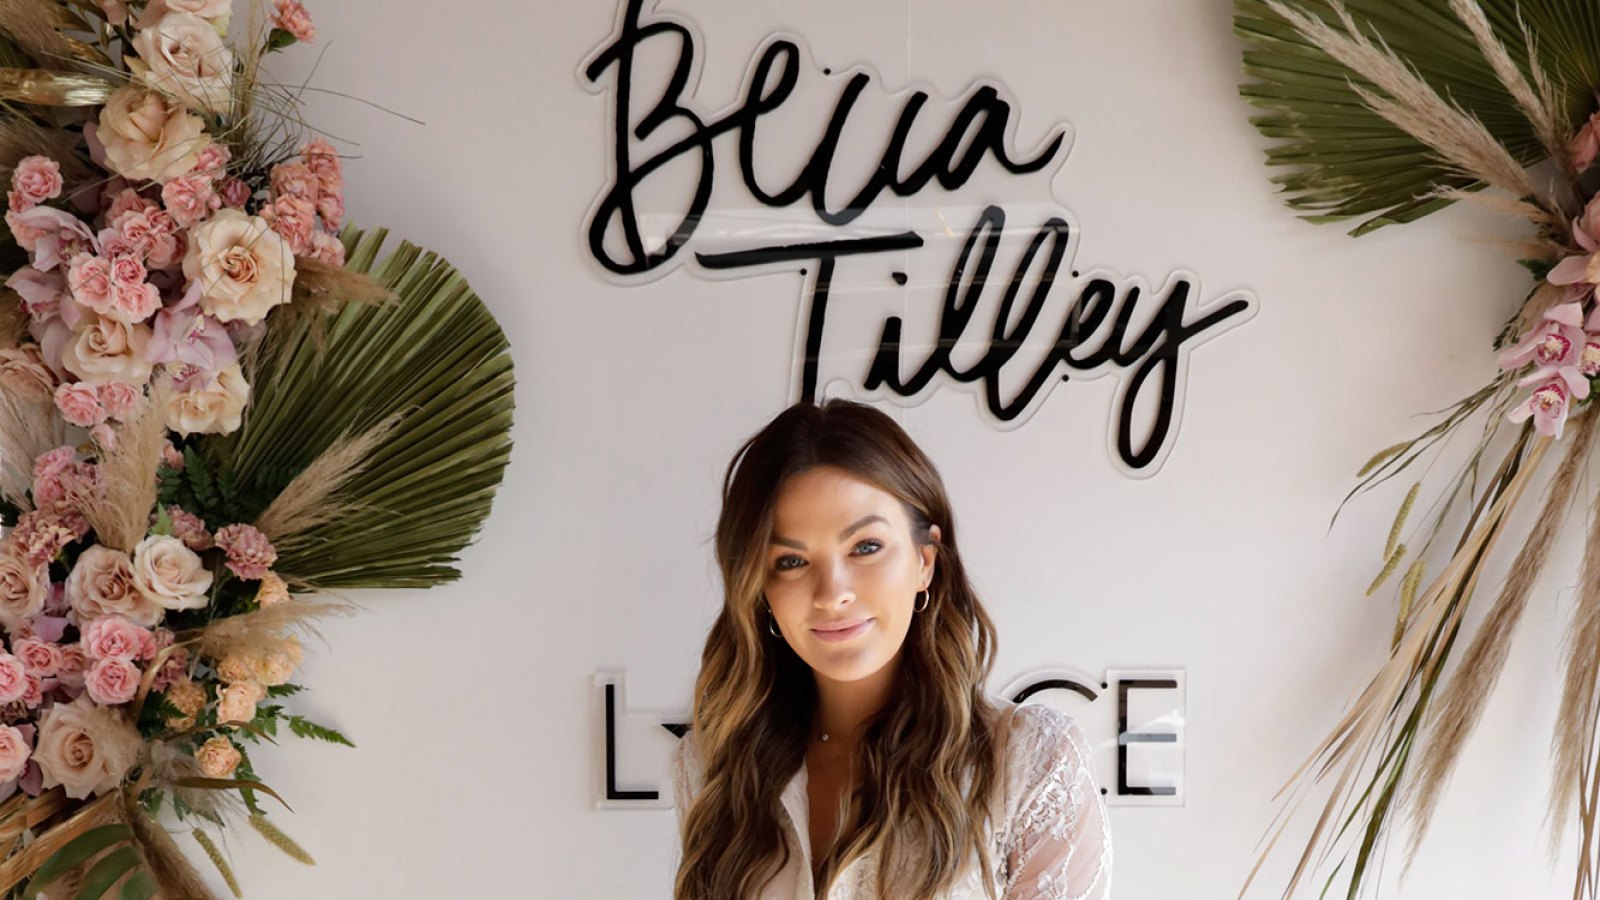 Becca Tilley Reveals Her Top Tips for Getting Bikini-Ready Fast